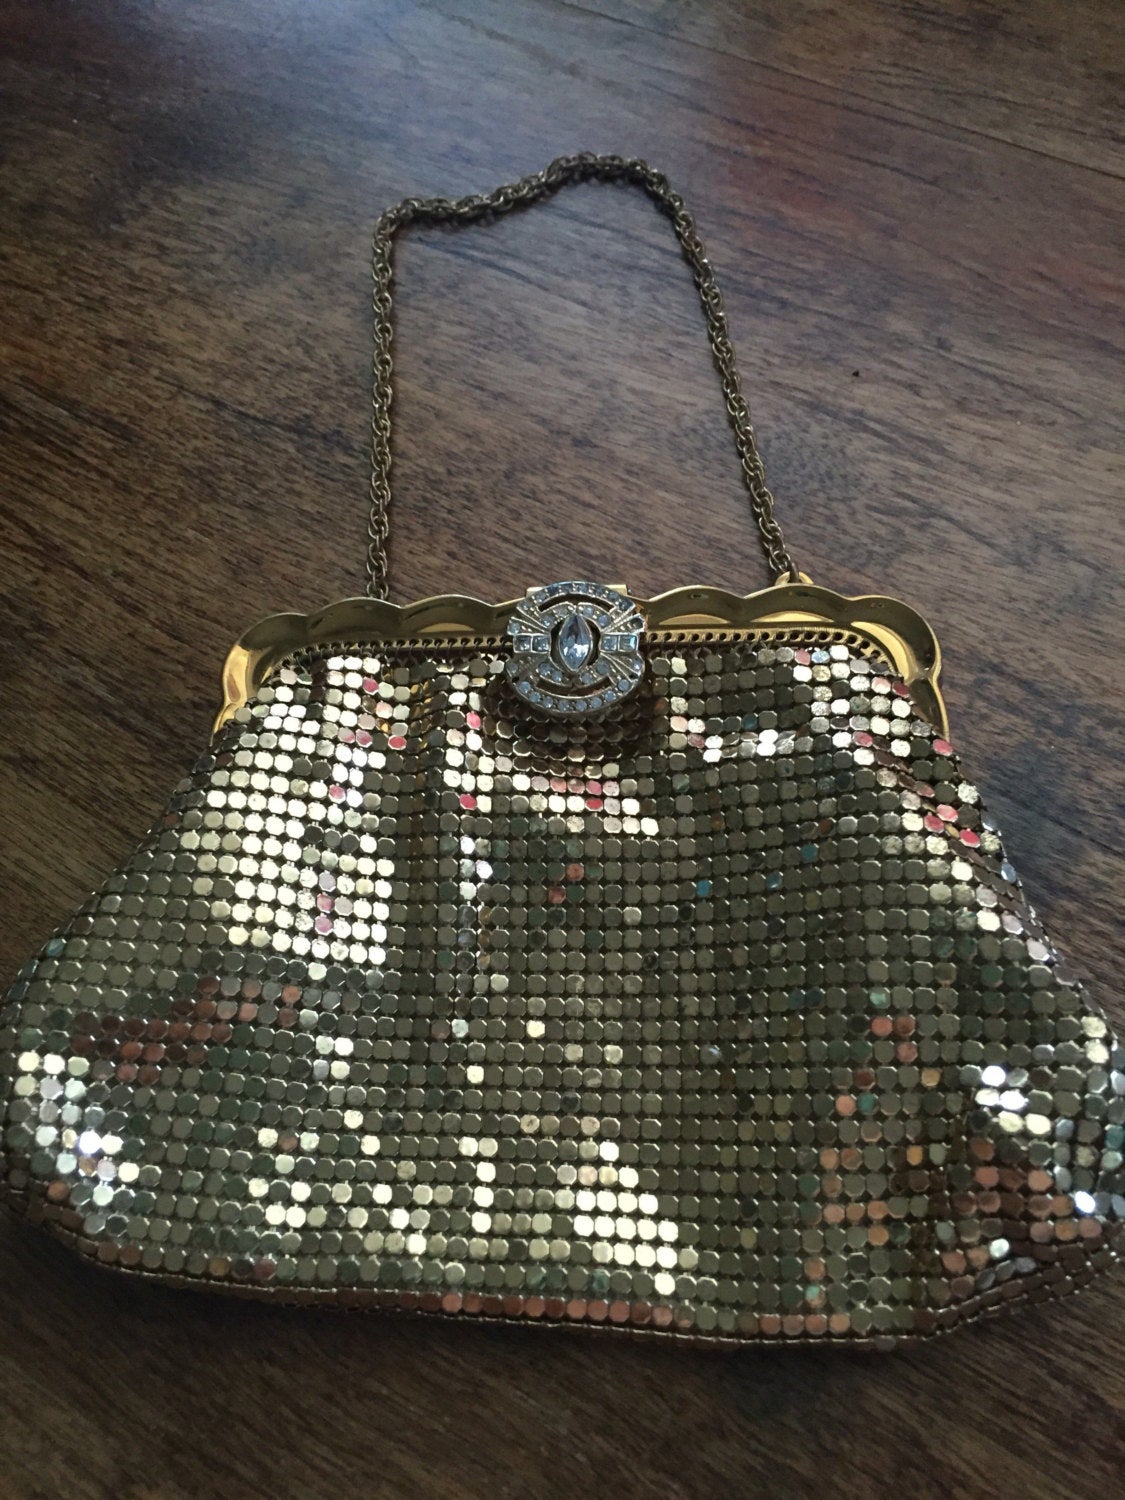 Whiting and Davis Gold Clutch-Chain Mail Clutch-Vintage Evening Bag